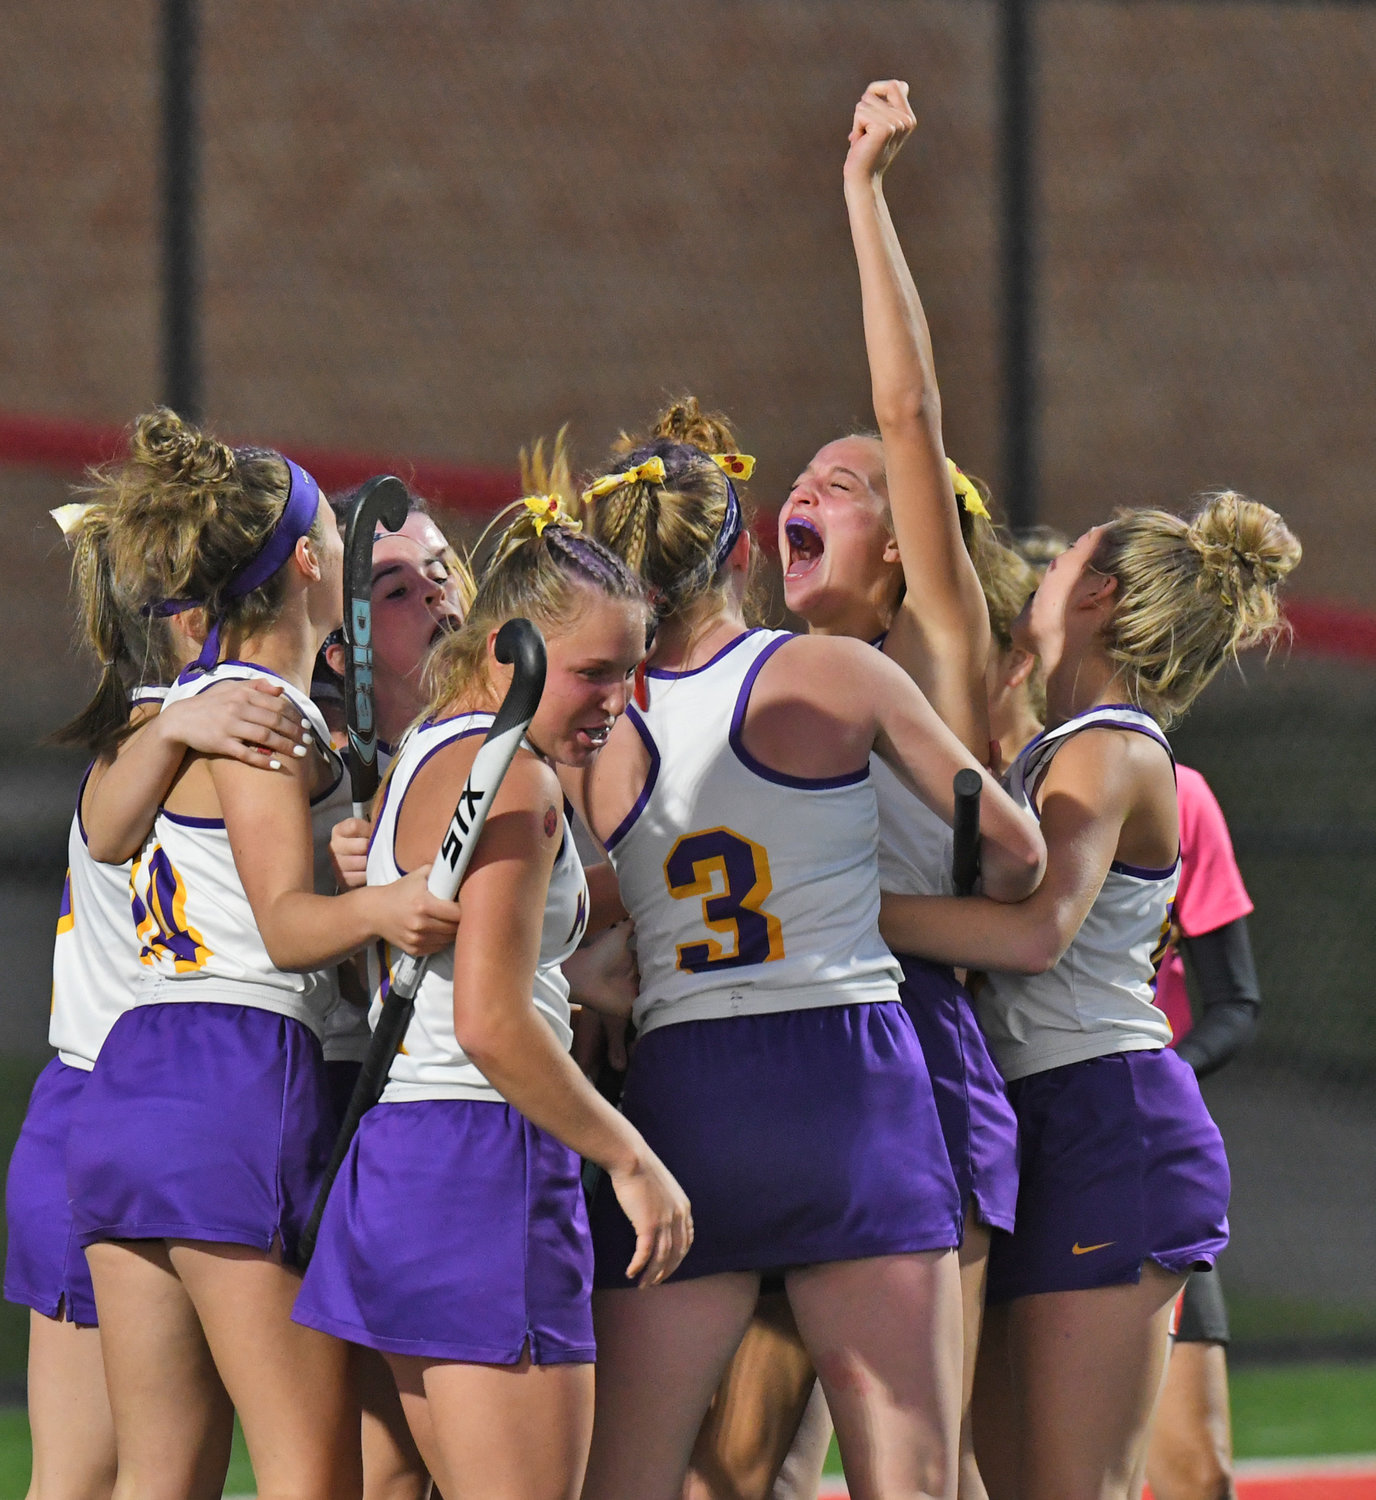 The Holland Patent field hockey team celebrates their goal late in the 4th quarter against New Hartford to win the Class B Section III championship Sunday night at Vernon-Verona-Sherrill High School. It was the fifth consecutive Section III title for Holland Patent.